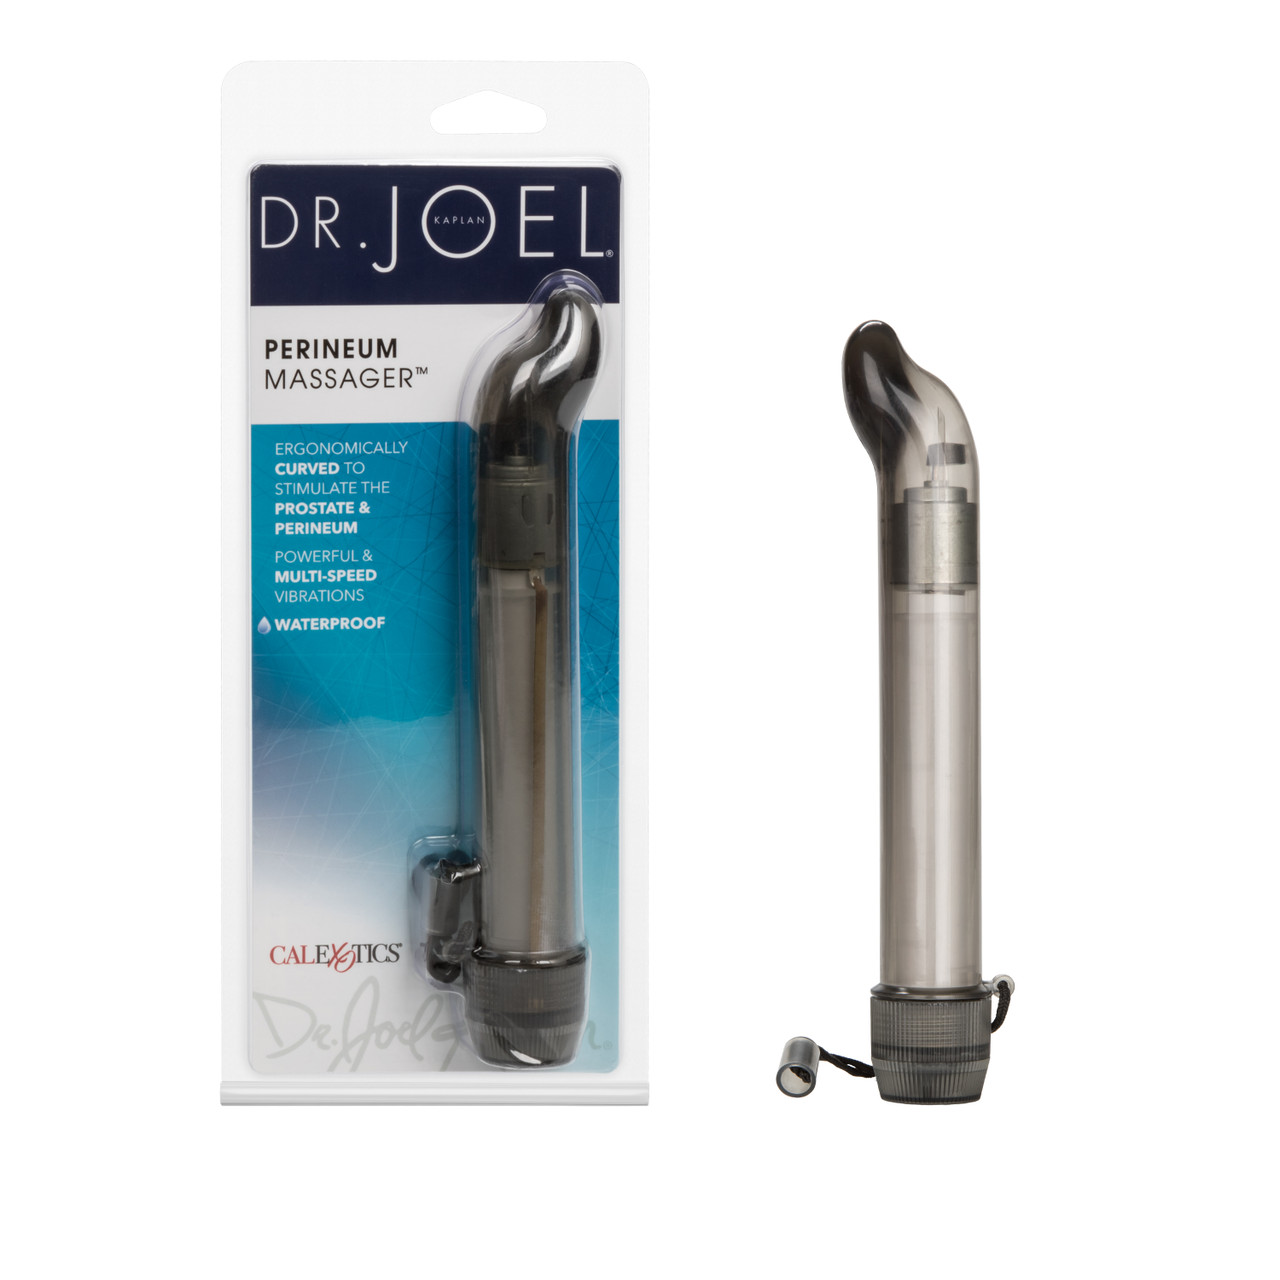 DR JOEL PERINEUM MASSAGER 6.5IN - Click Image to Close